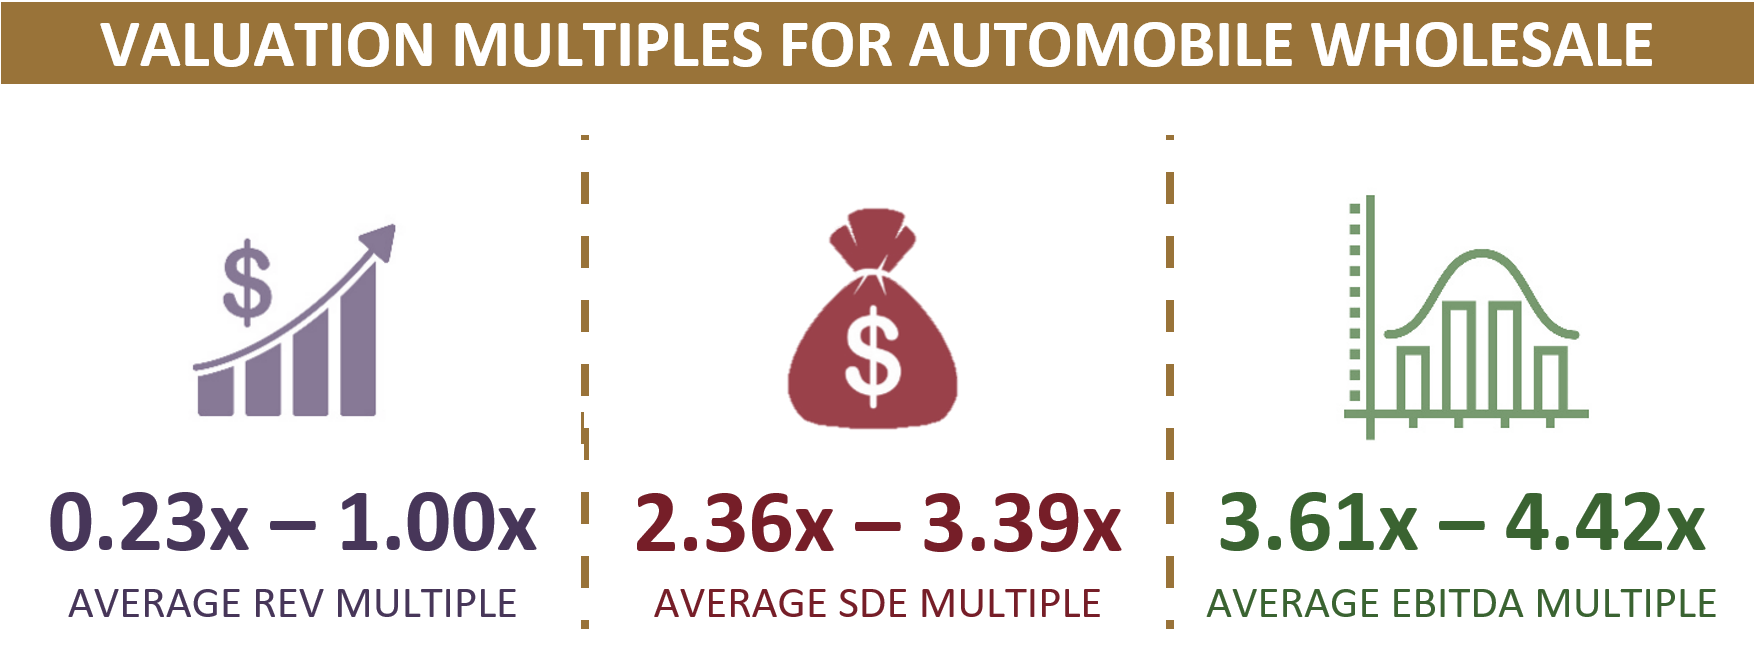 Market Multiples For Automobile Wholesaling